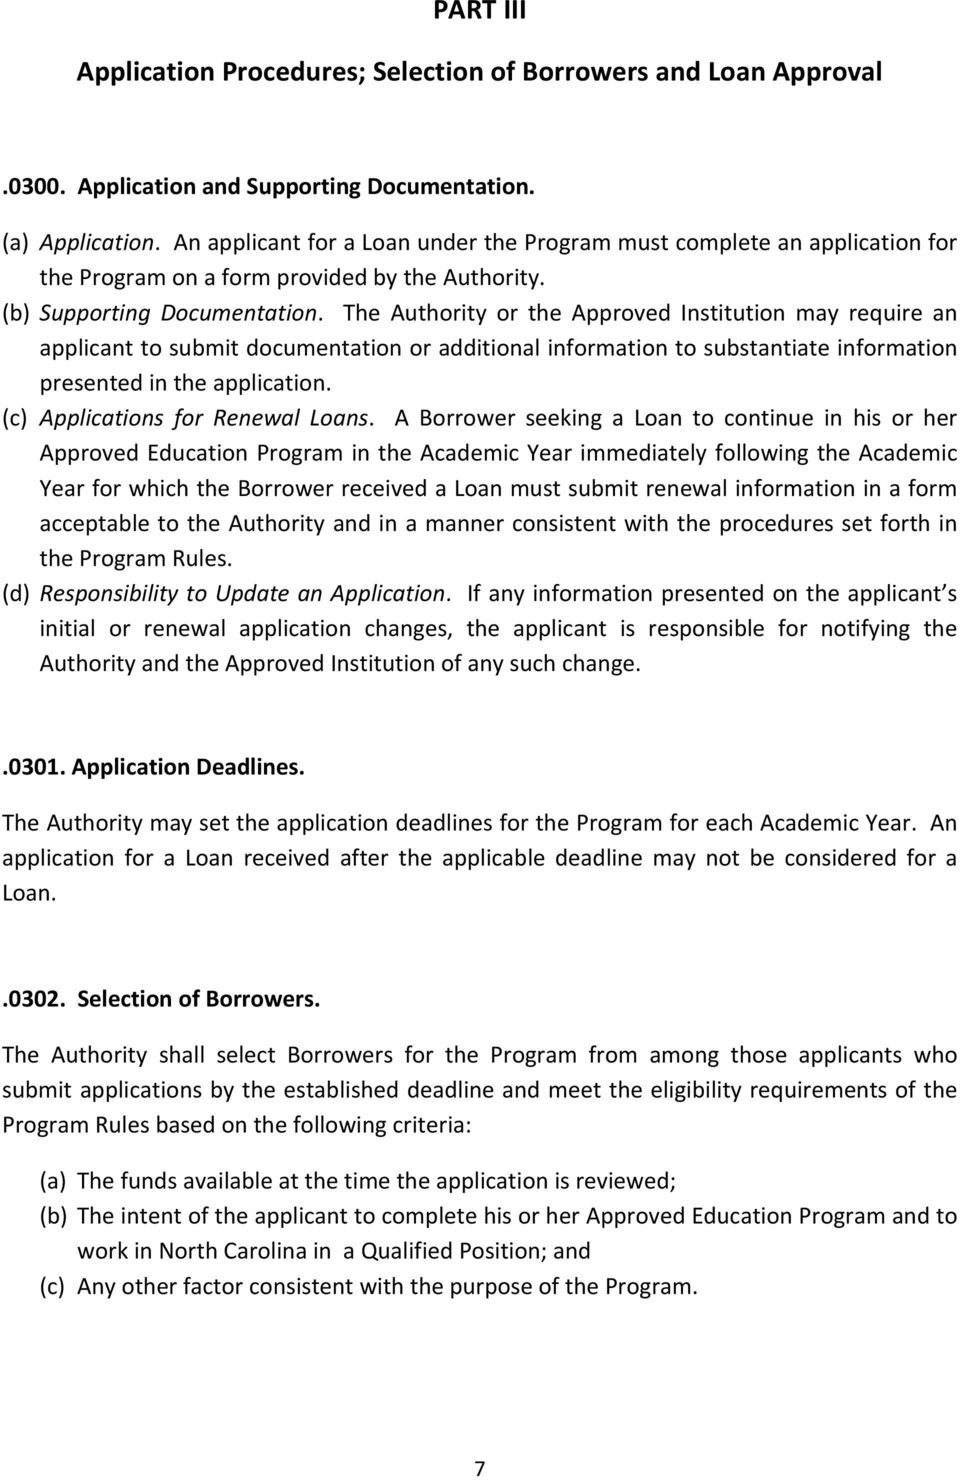 The Authority or the Approved Institution may require an applicant to submit documentation or additional information to substantiate information presented in the application.